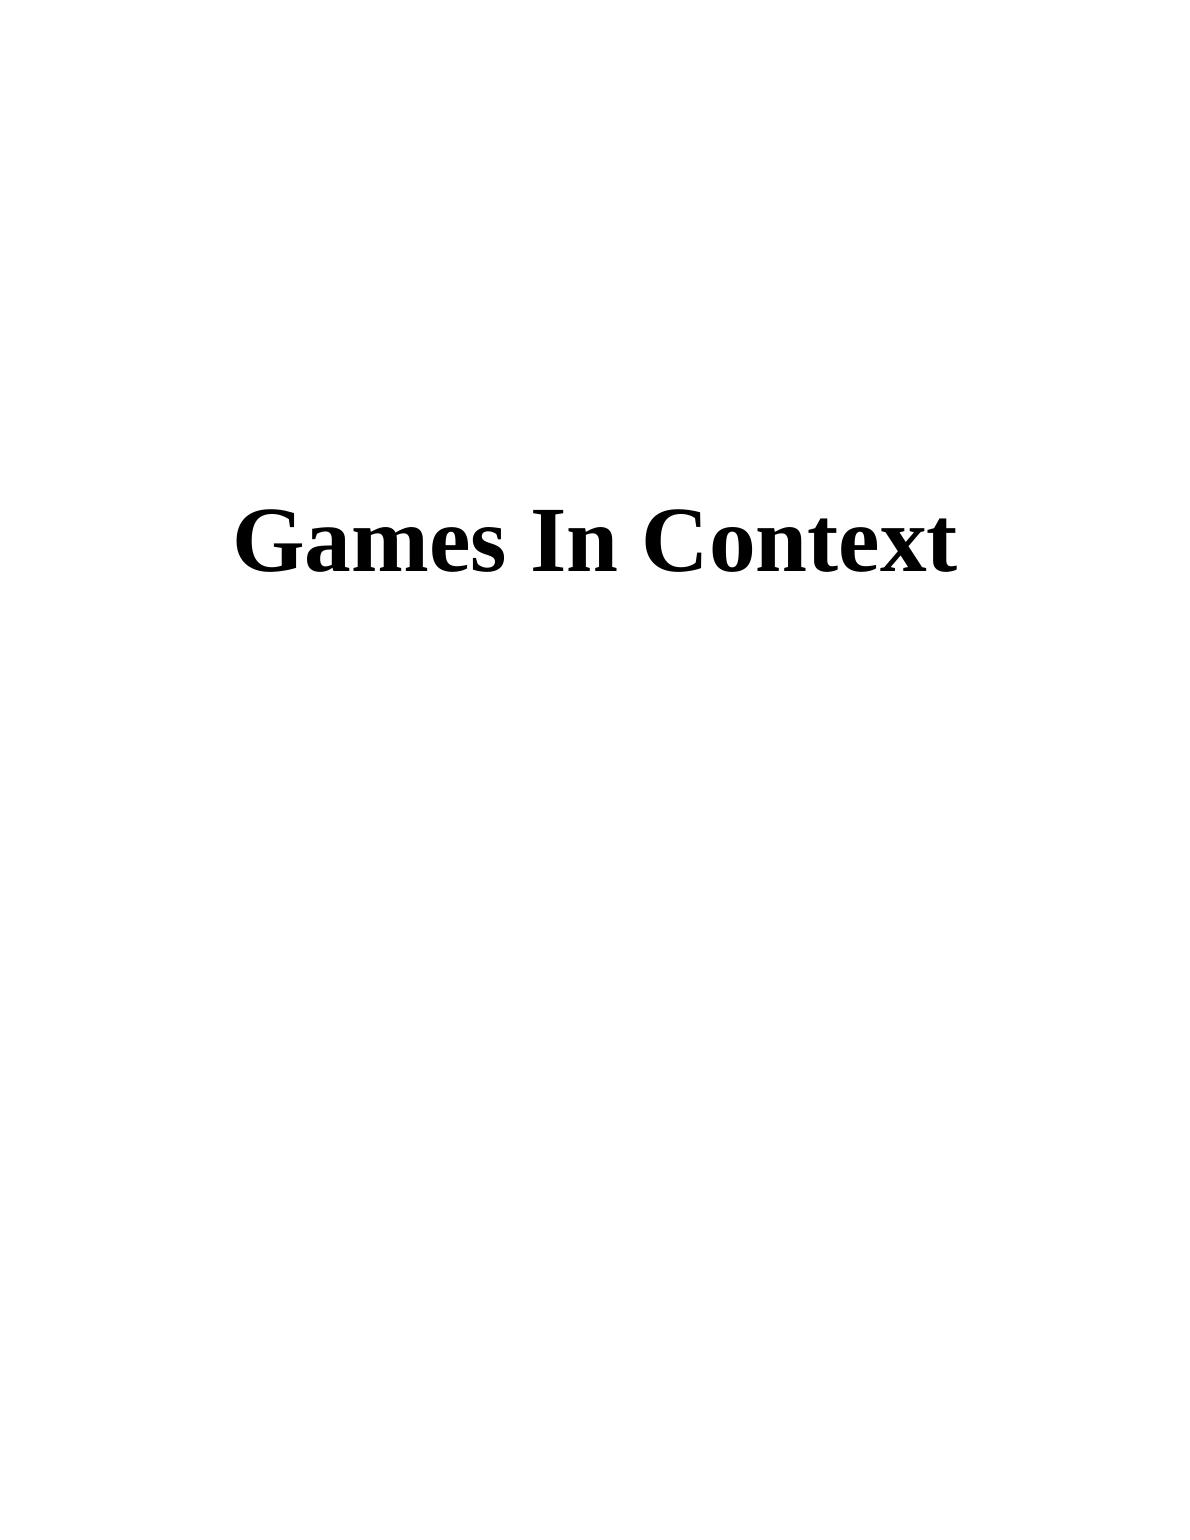 Development History of Video Games Industry_1